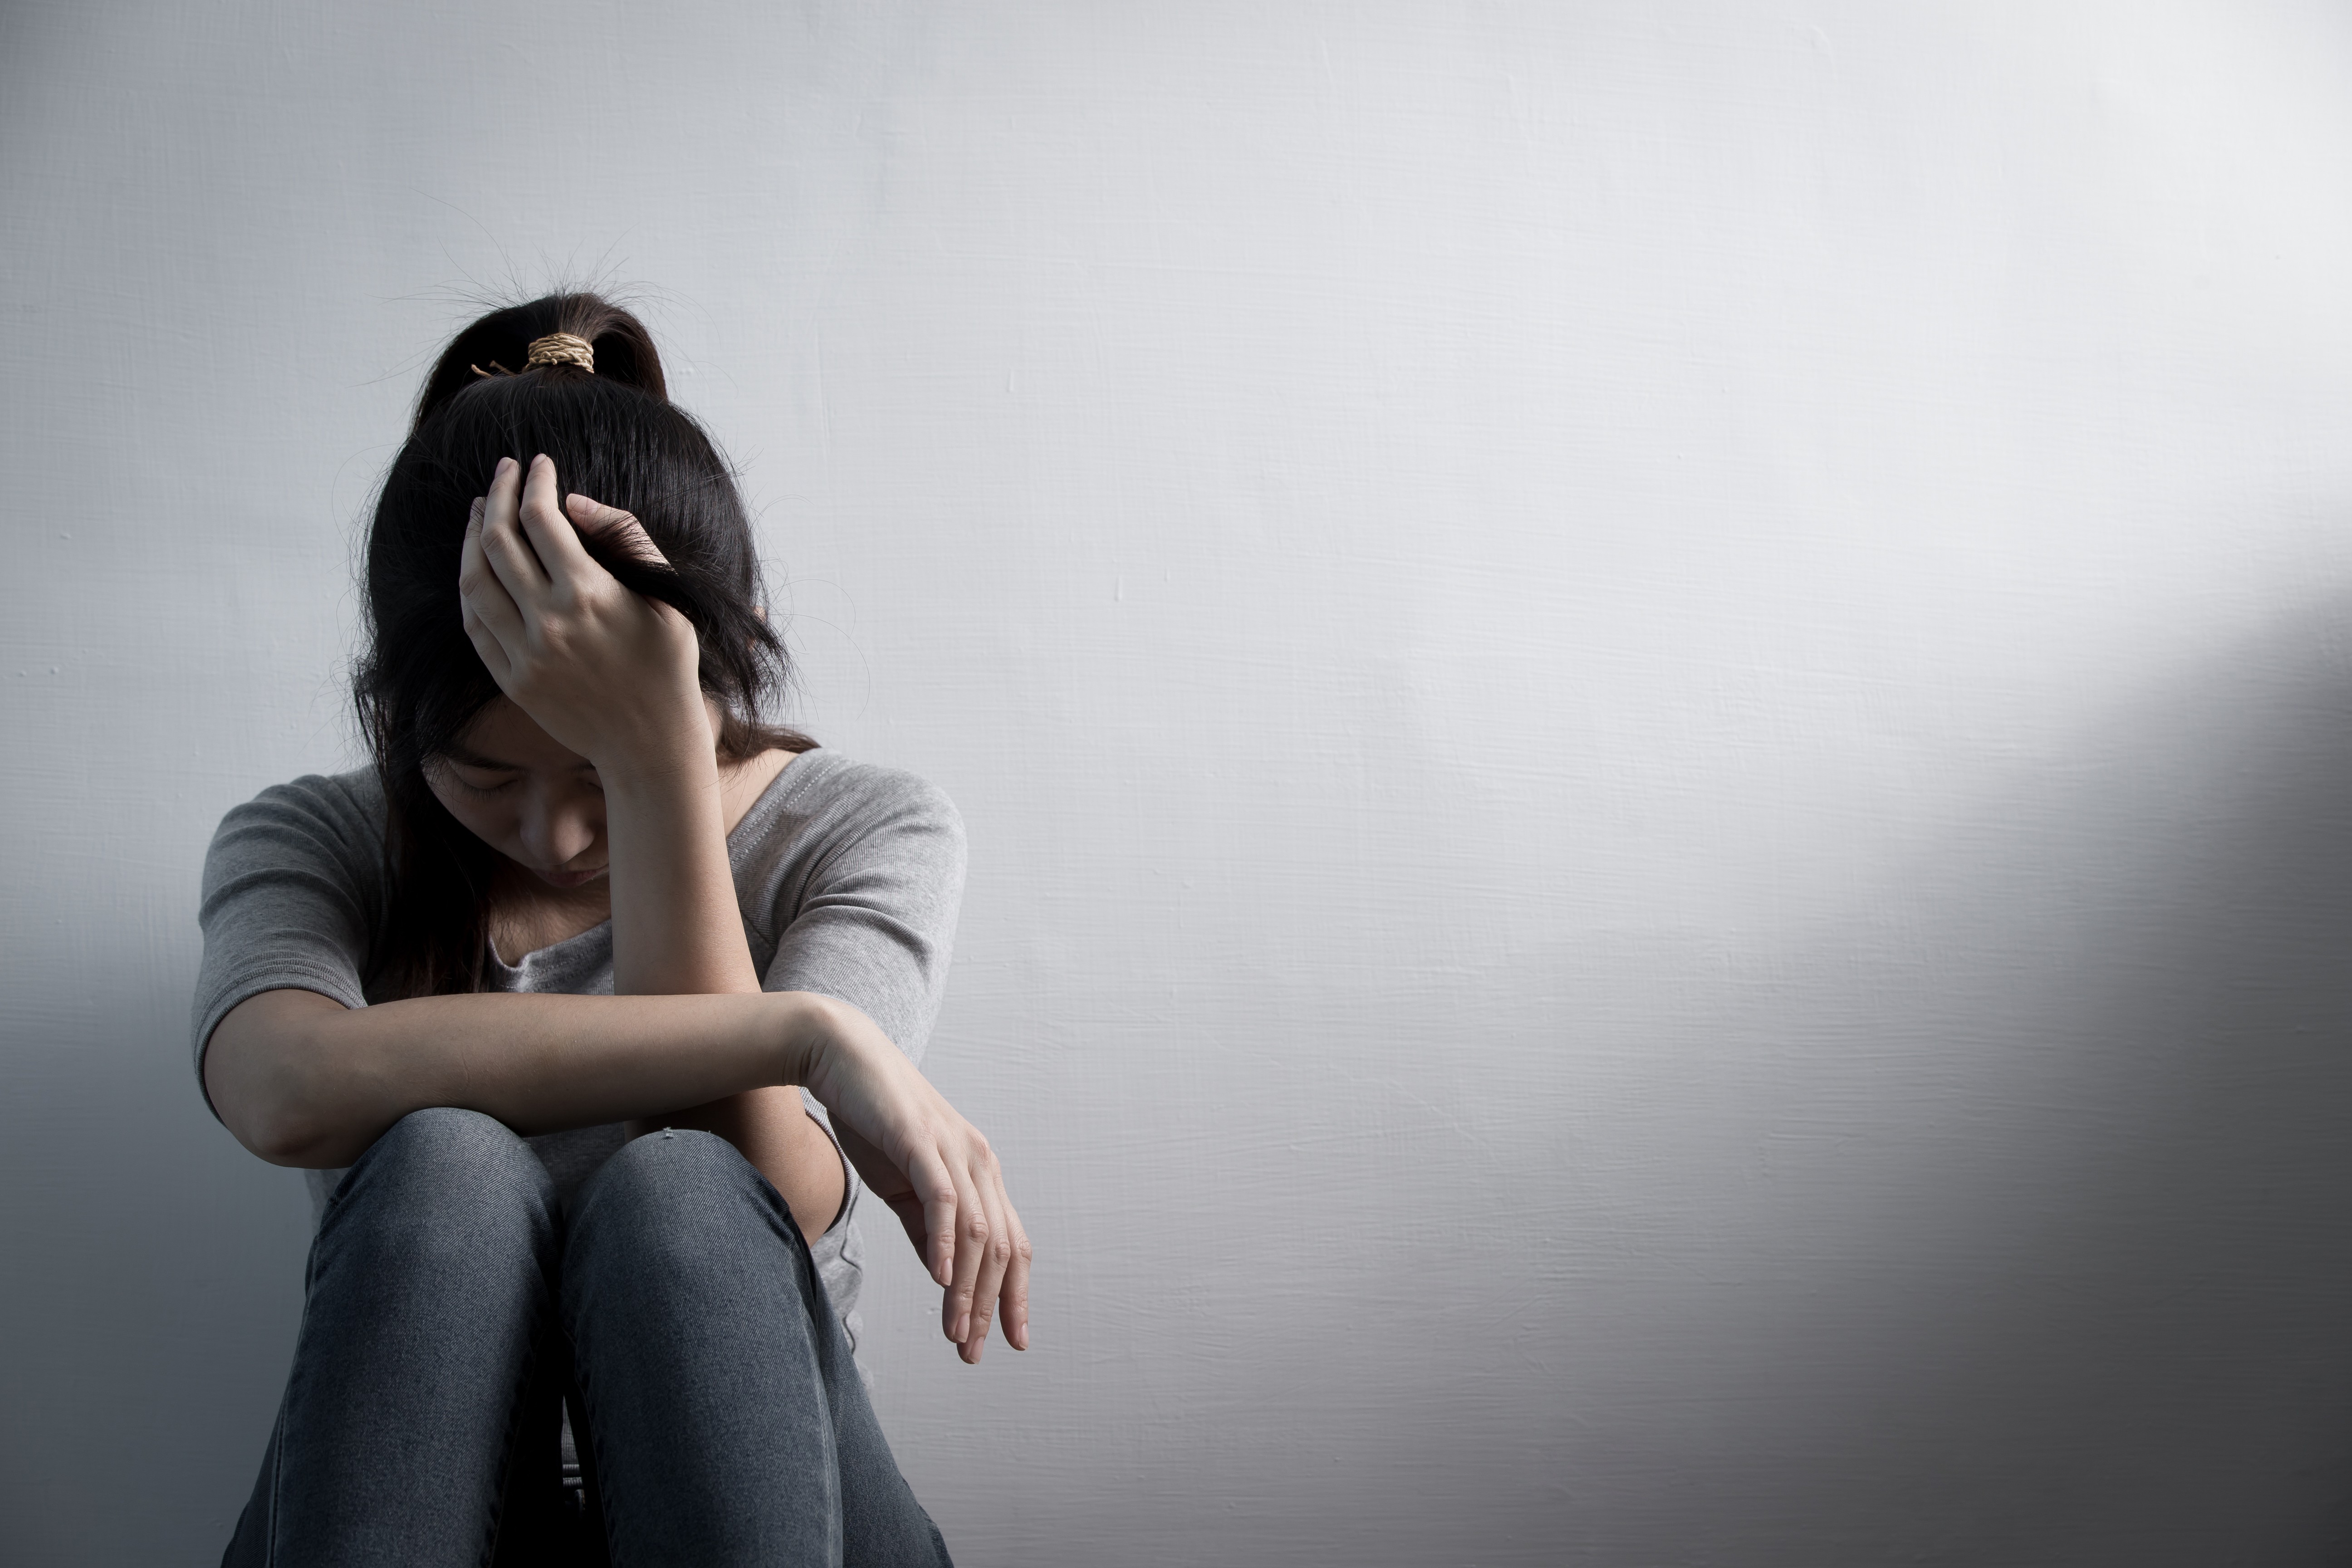 Hong Kong’s shortage of medical personnel may be mostly deeply felt in mental health, as a growing number of young people are seeking help. Photo: Shutterstock